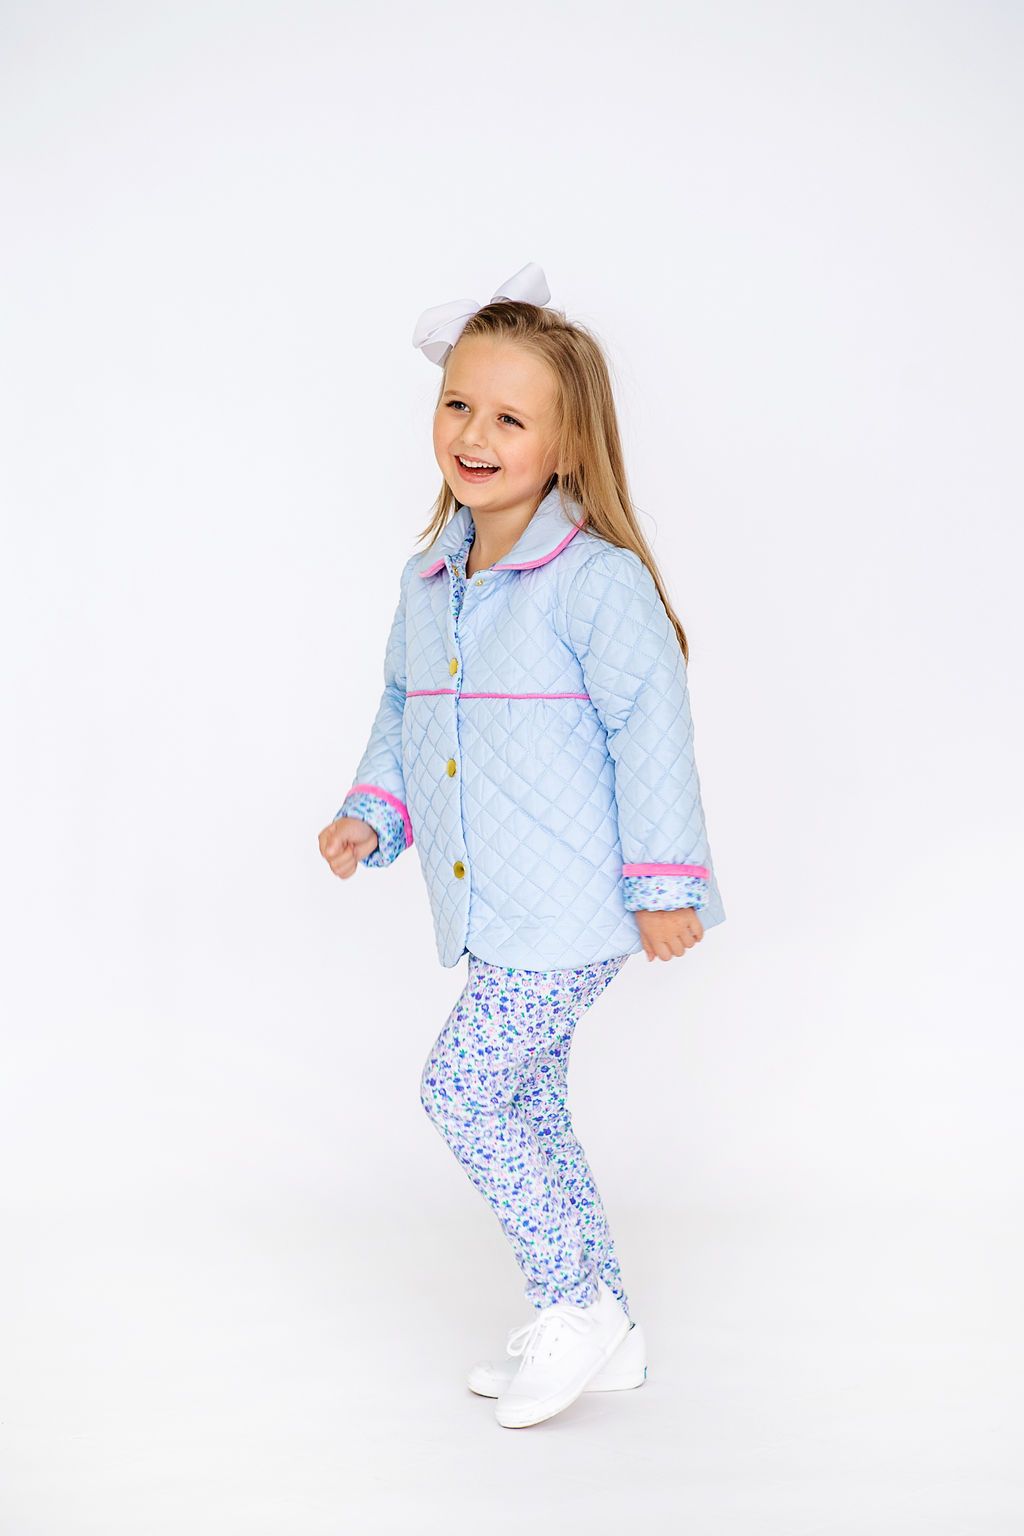 Carlyle Quilted Coat - Buckhead Blue/Mableton Minnie Floral - Breckenridge Baby